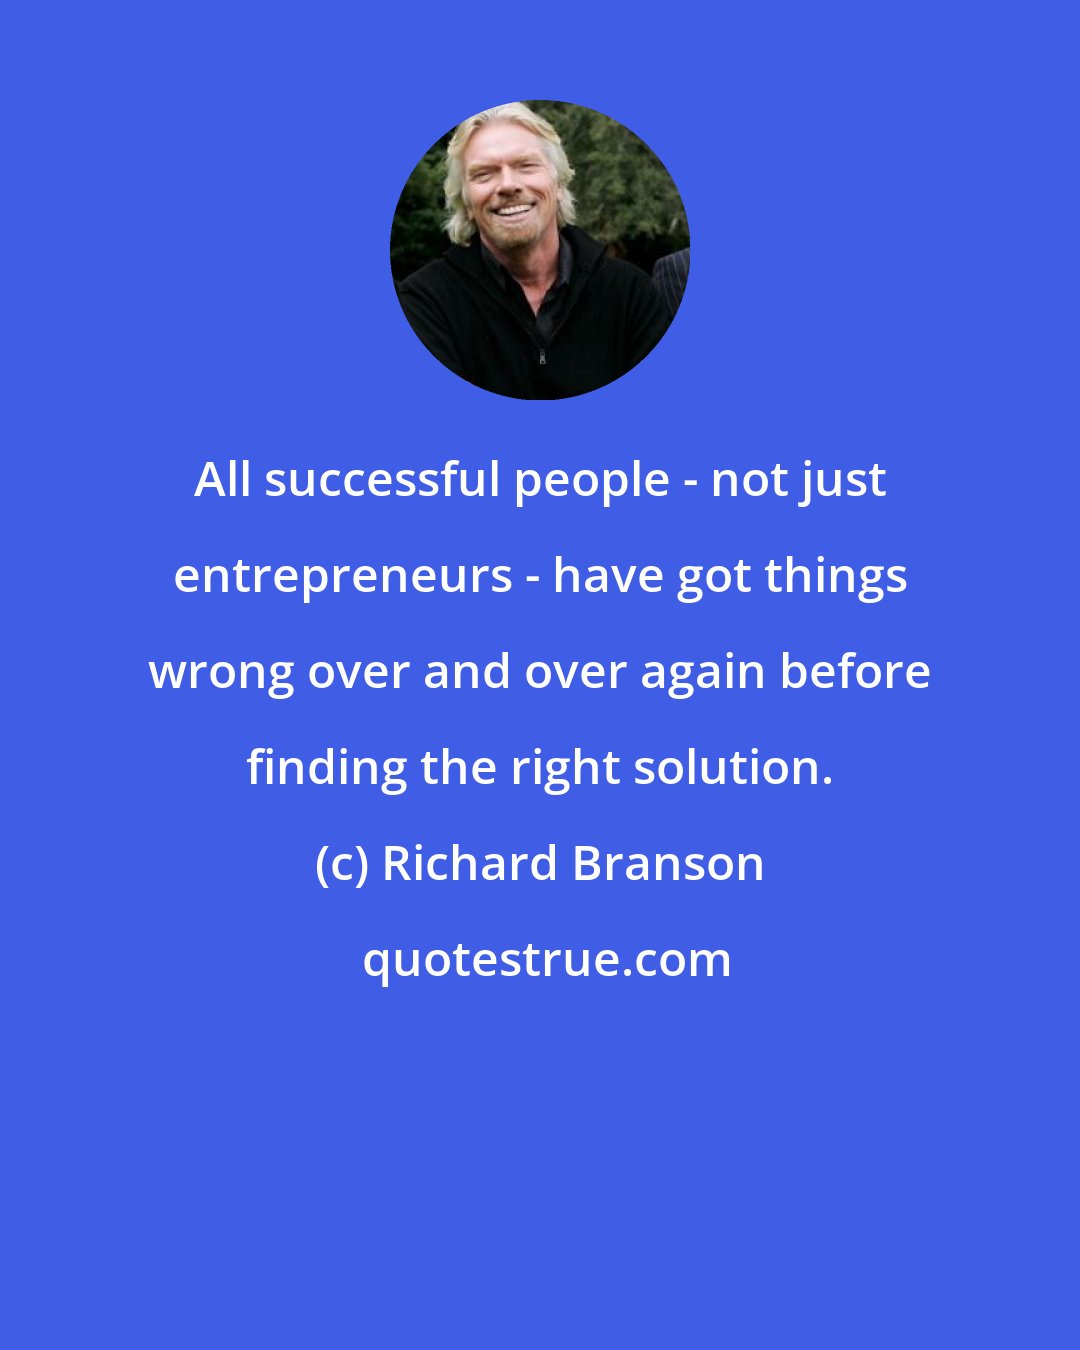 Richard Branson: All successful people - not just entrepreneurs - have got things wrong over and over again before finding the right solution.